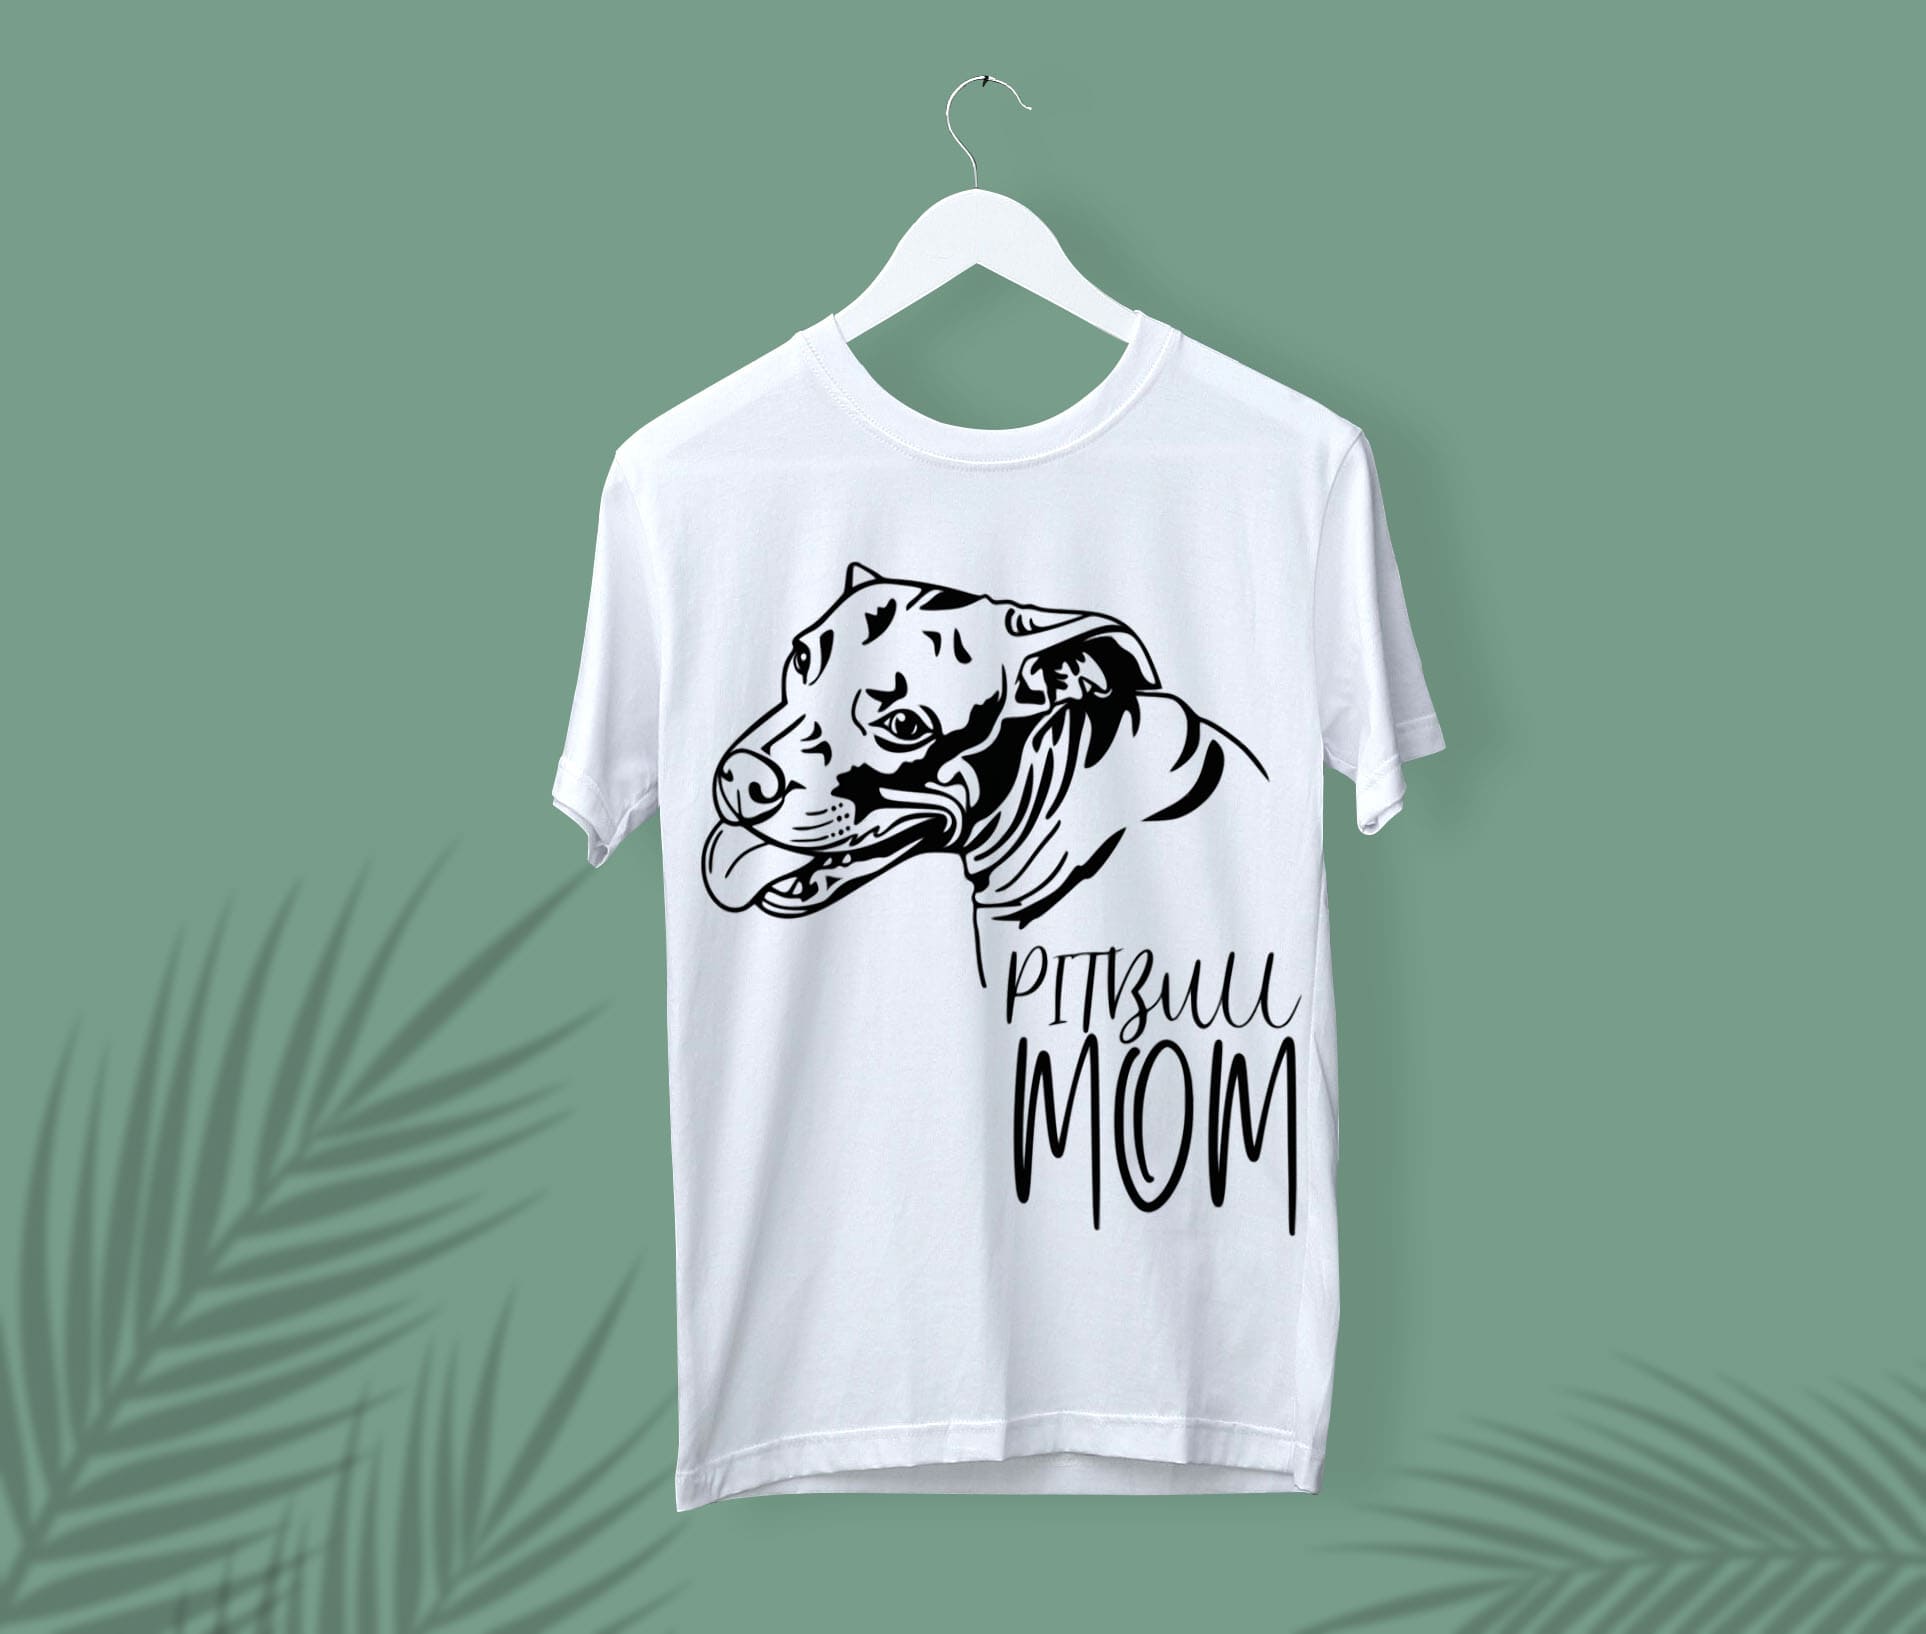 White t-shirt with a black pitbull mom face on a white hanger, on a green background.